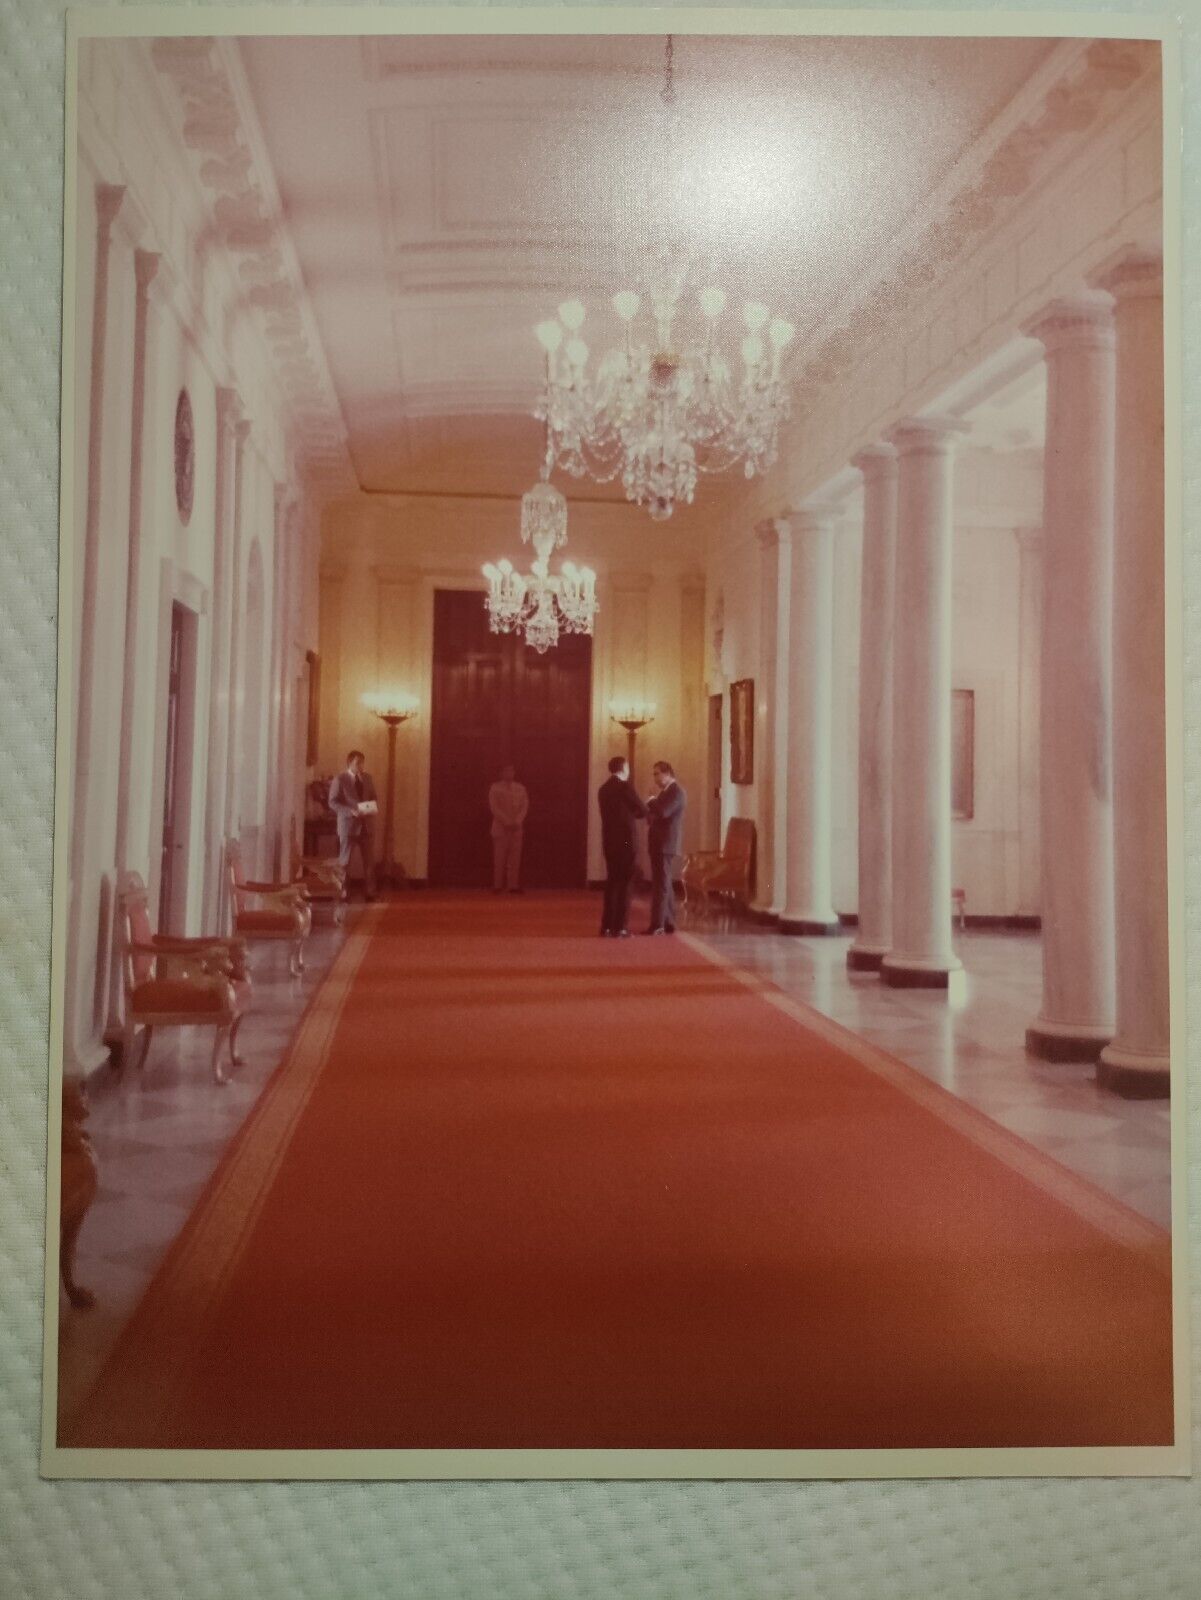 Original official photograph of the White House from the 1960s to 70sSize 11x14